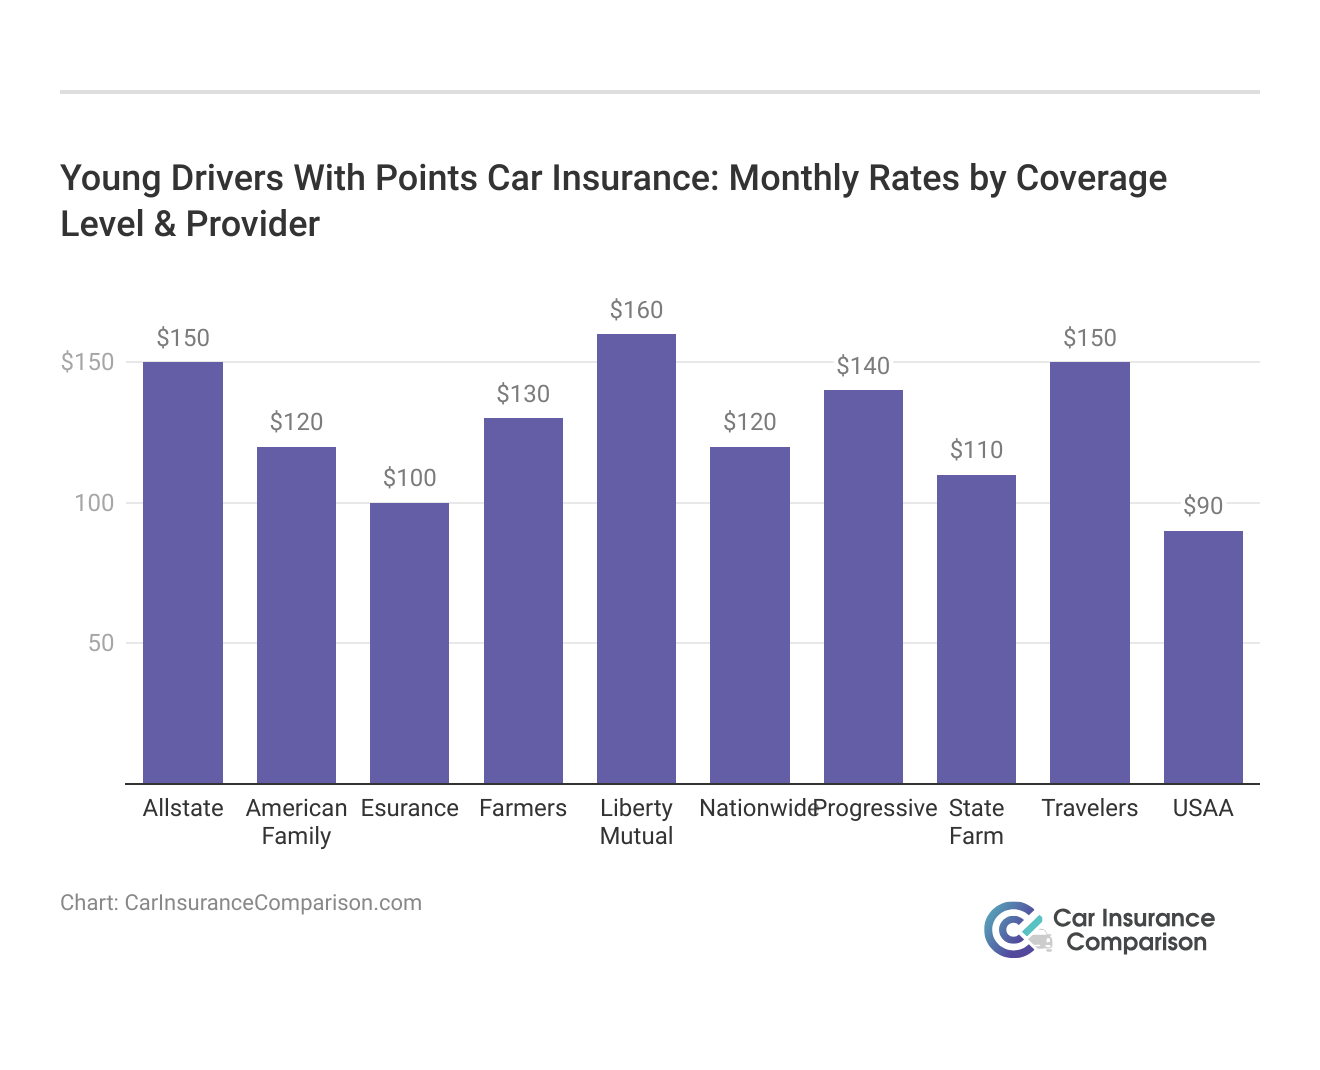 <h3>Young Drivers With Points Car Insurance: Monthly Rates by Coverage Level & Provider</h3>